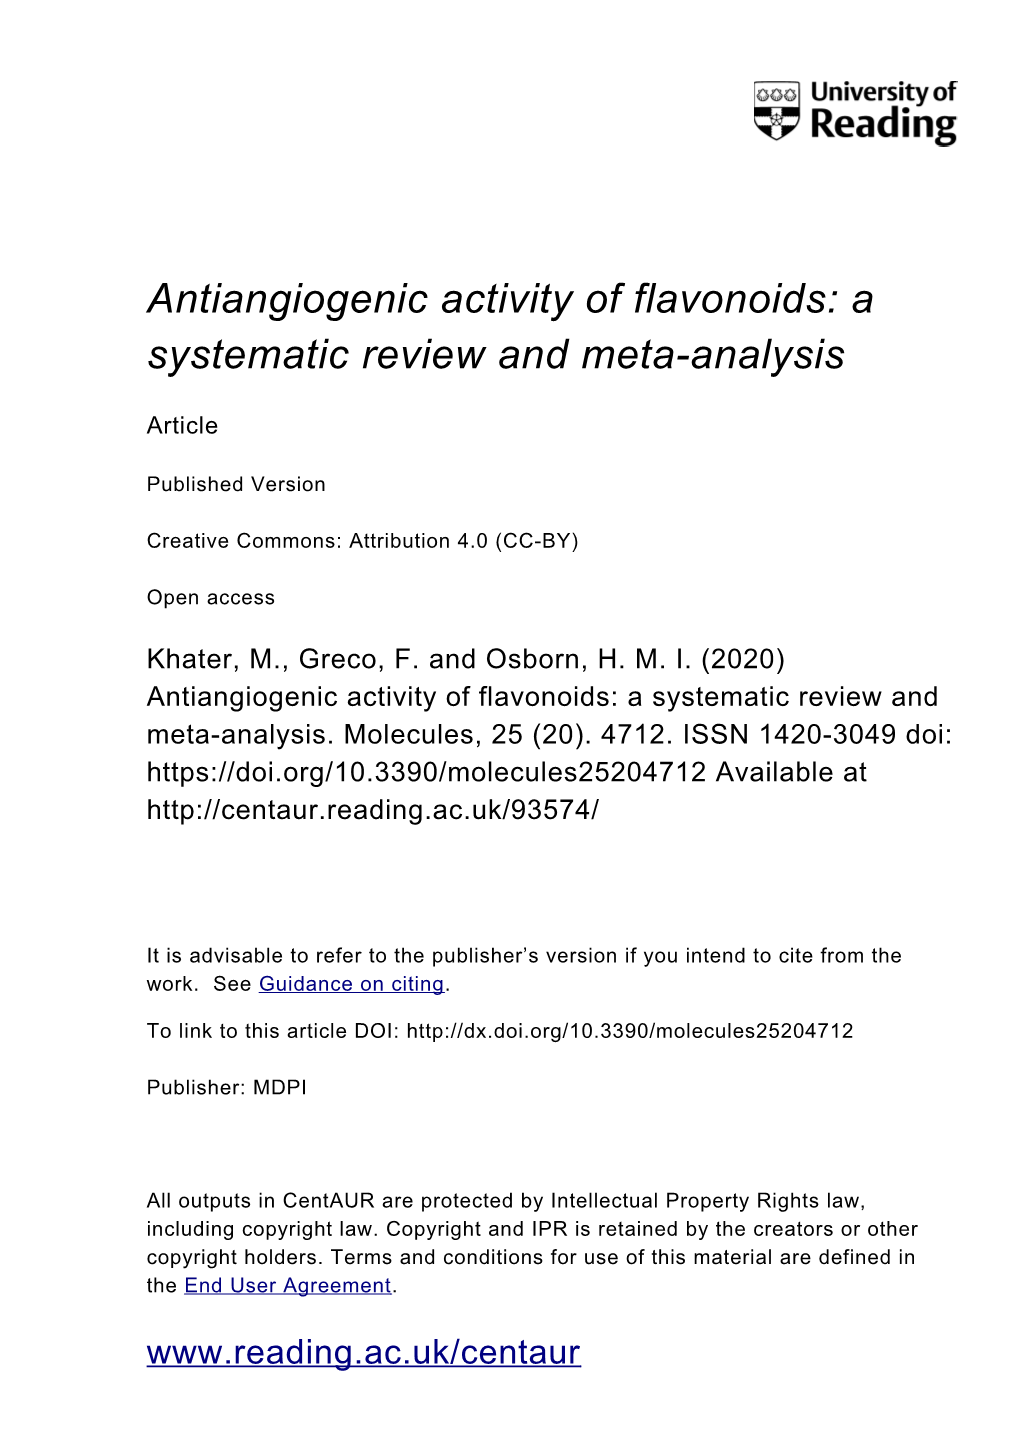 Antiangiogenic Activity of Flavonoids: a Systematic Review and Meta-Analysis